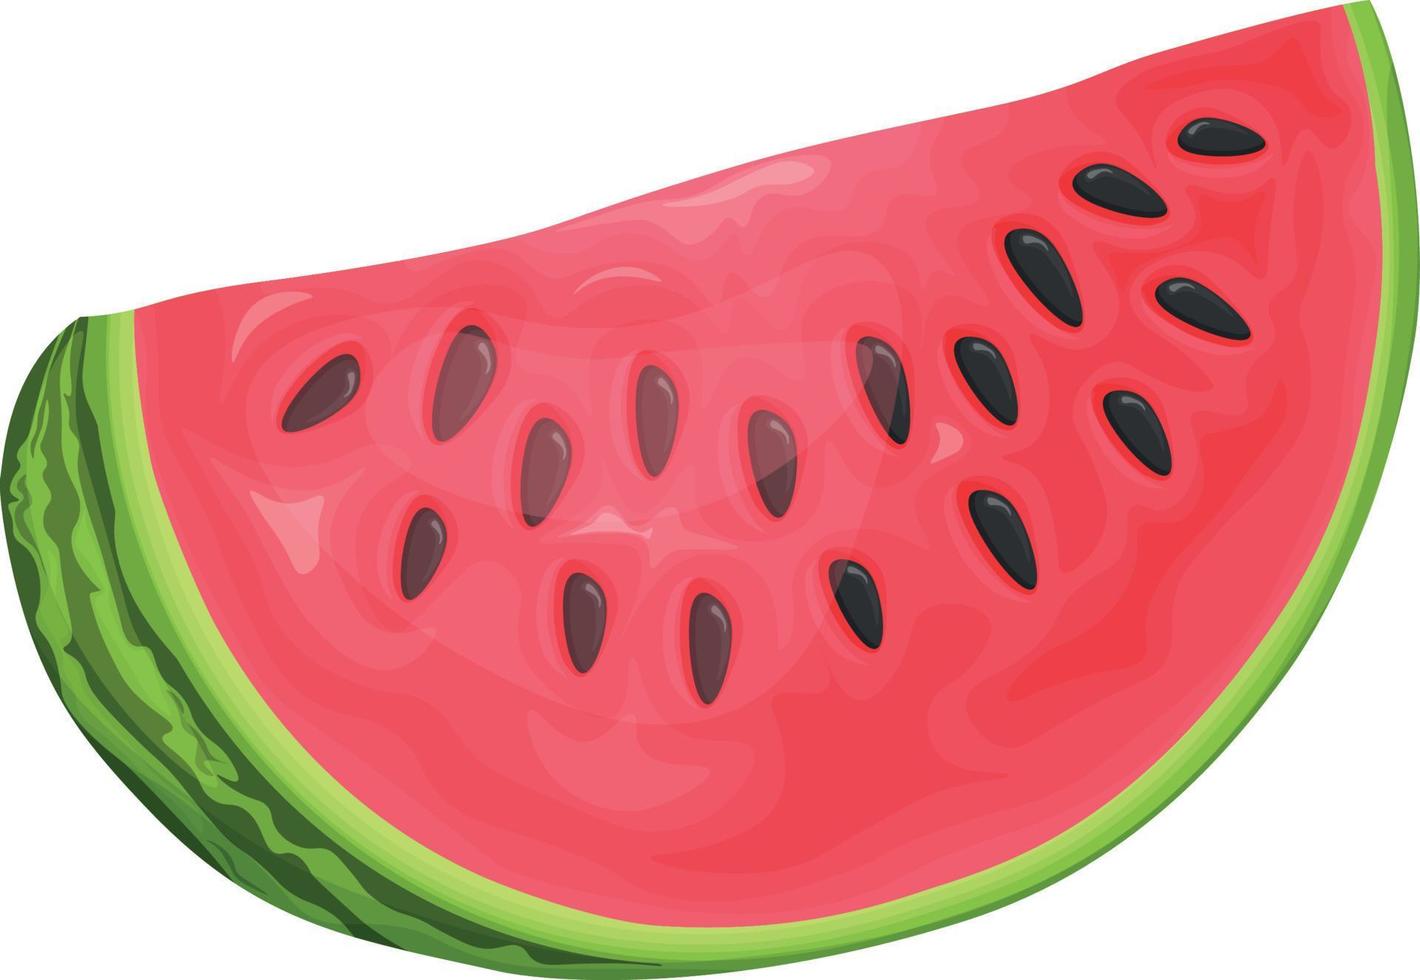 Watermelon. A piece of ripe watermelon. Sliced red ripe watermelon. Vector illustration isolated on a white background